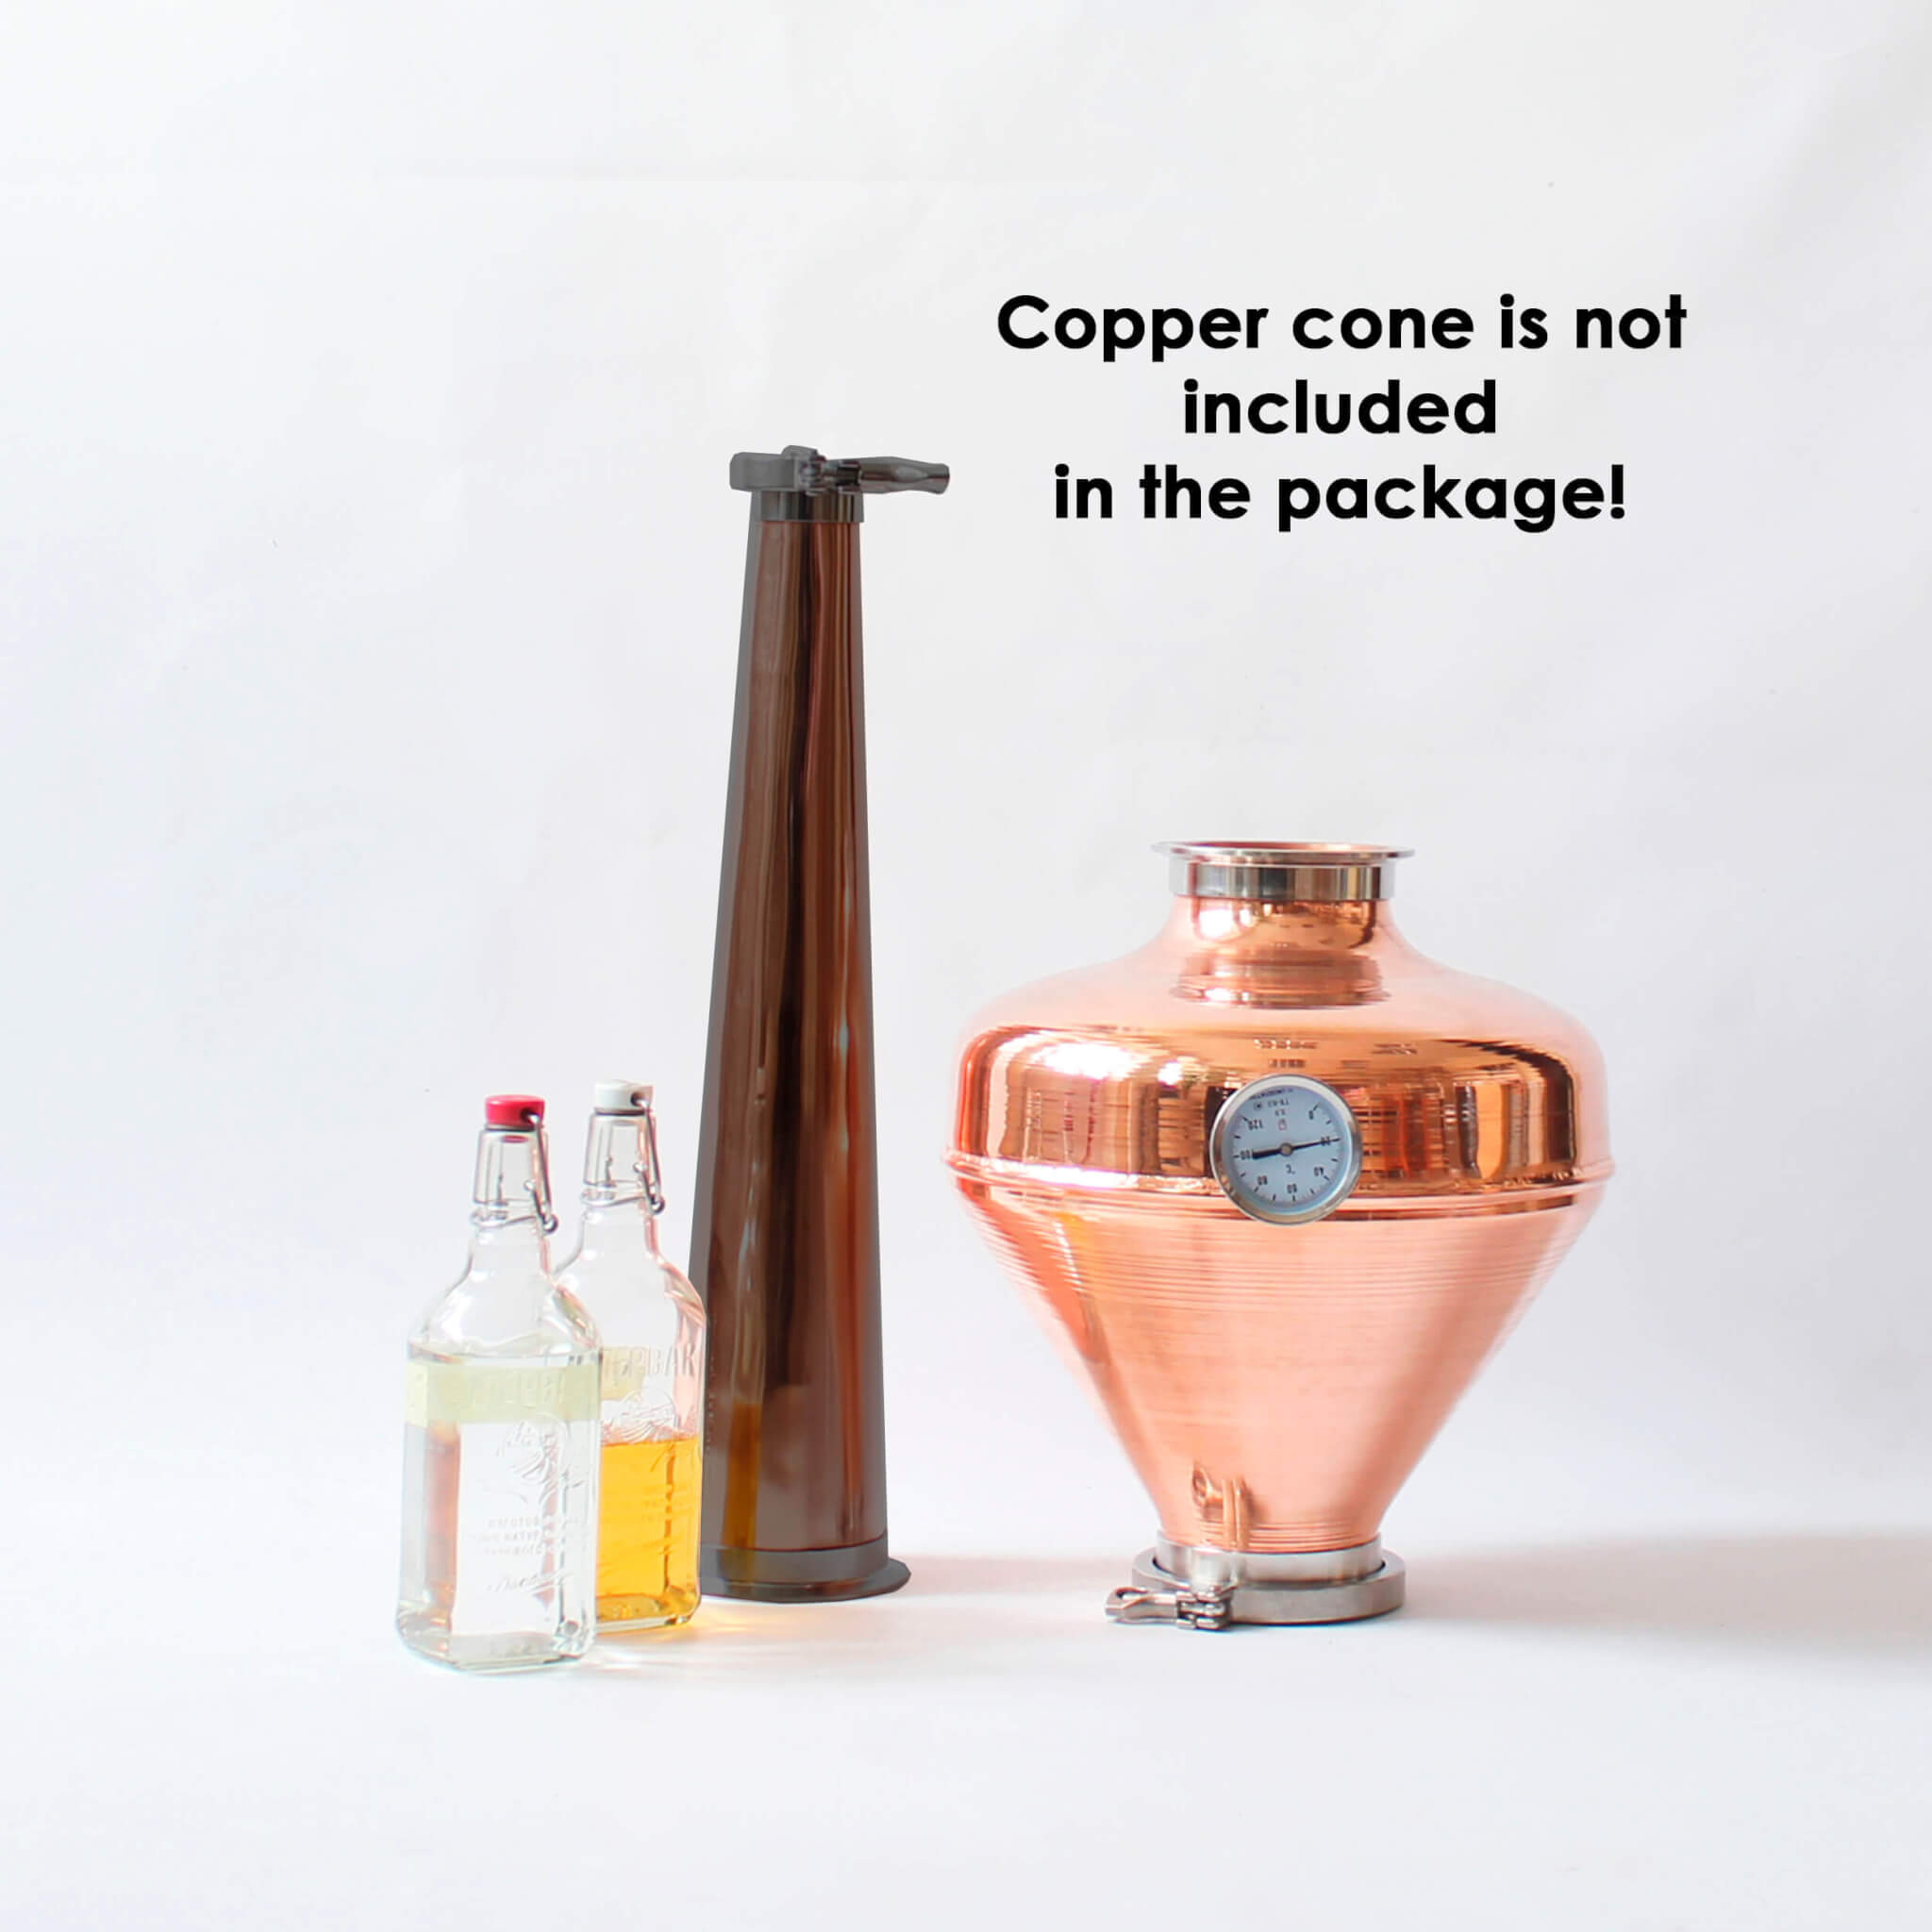 copper cone is not included in the package